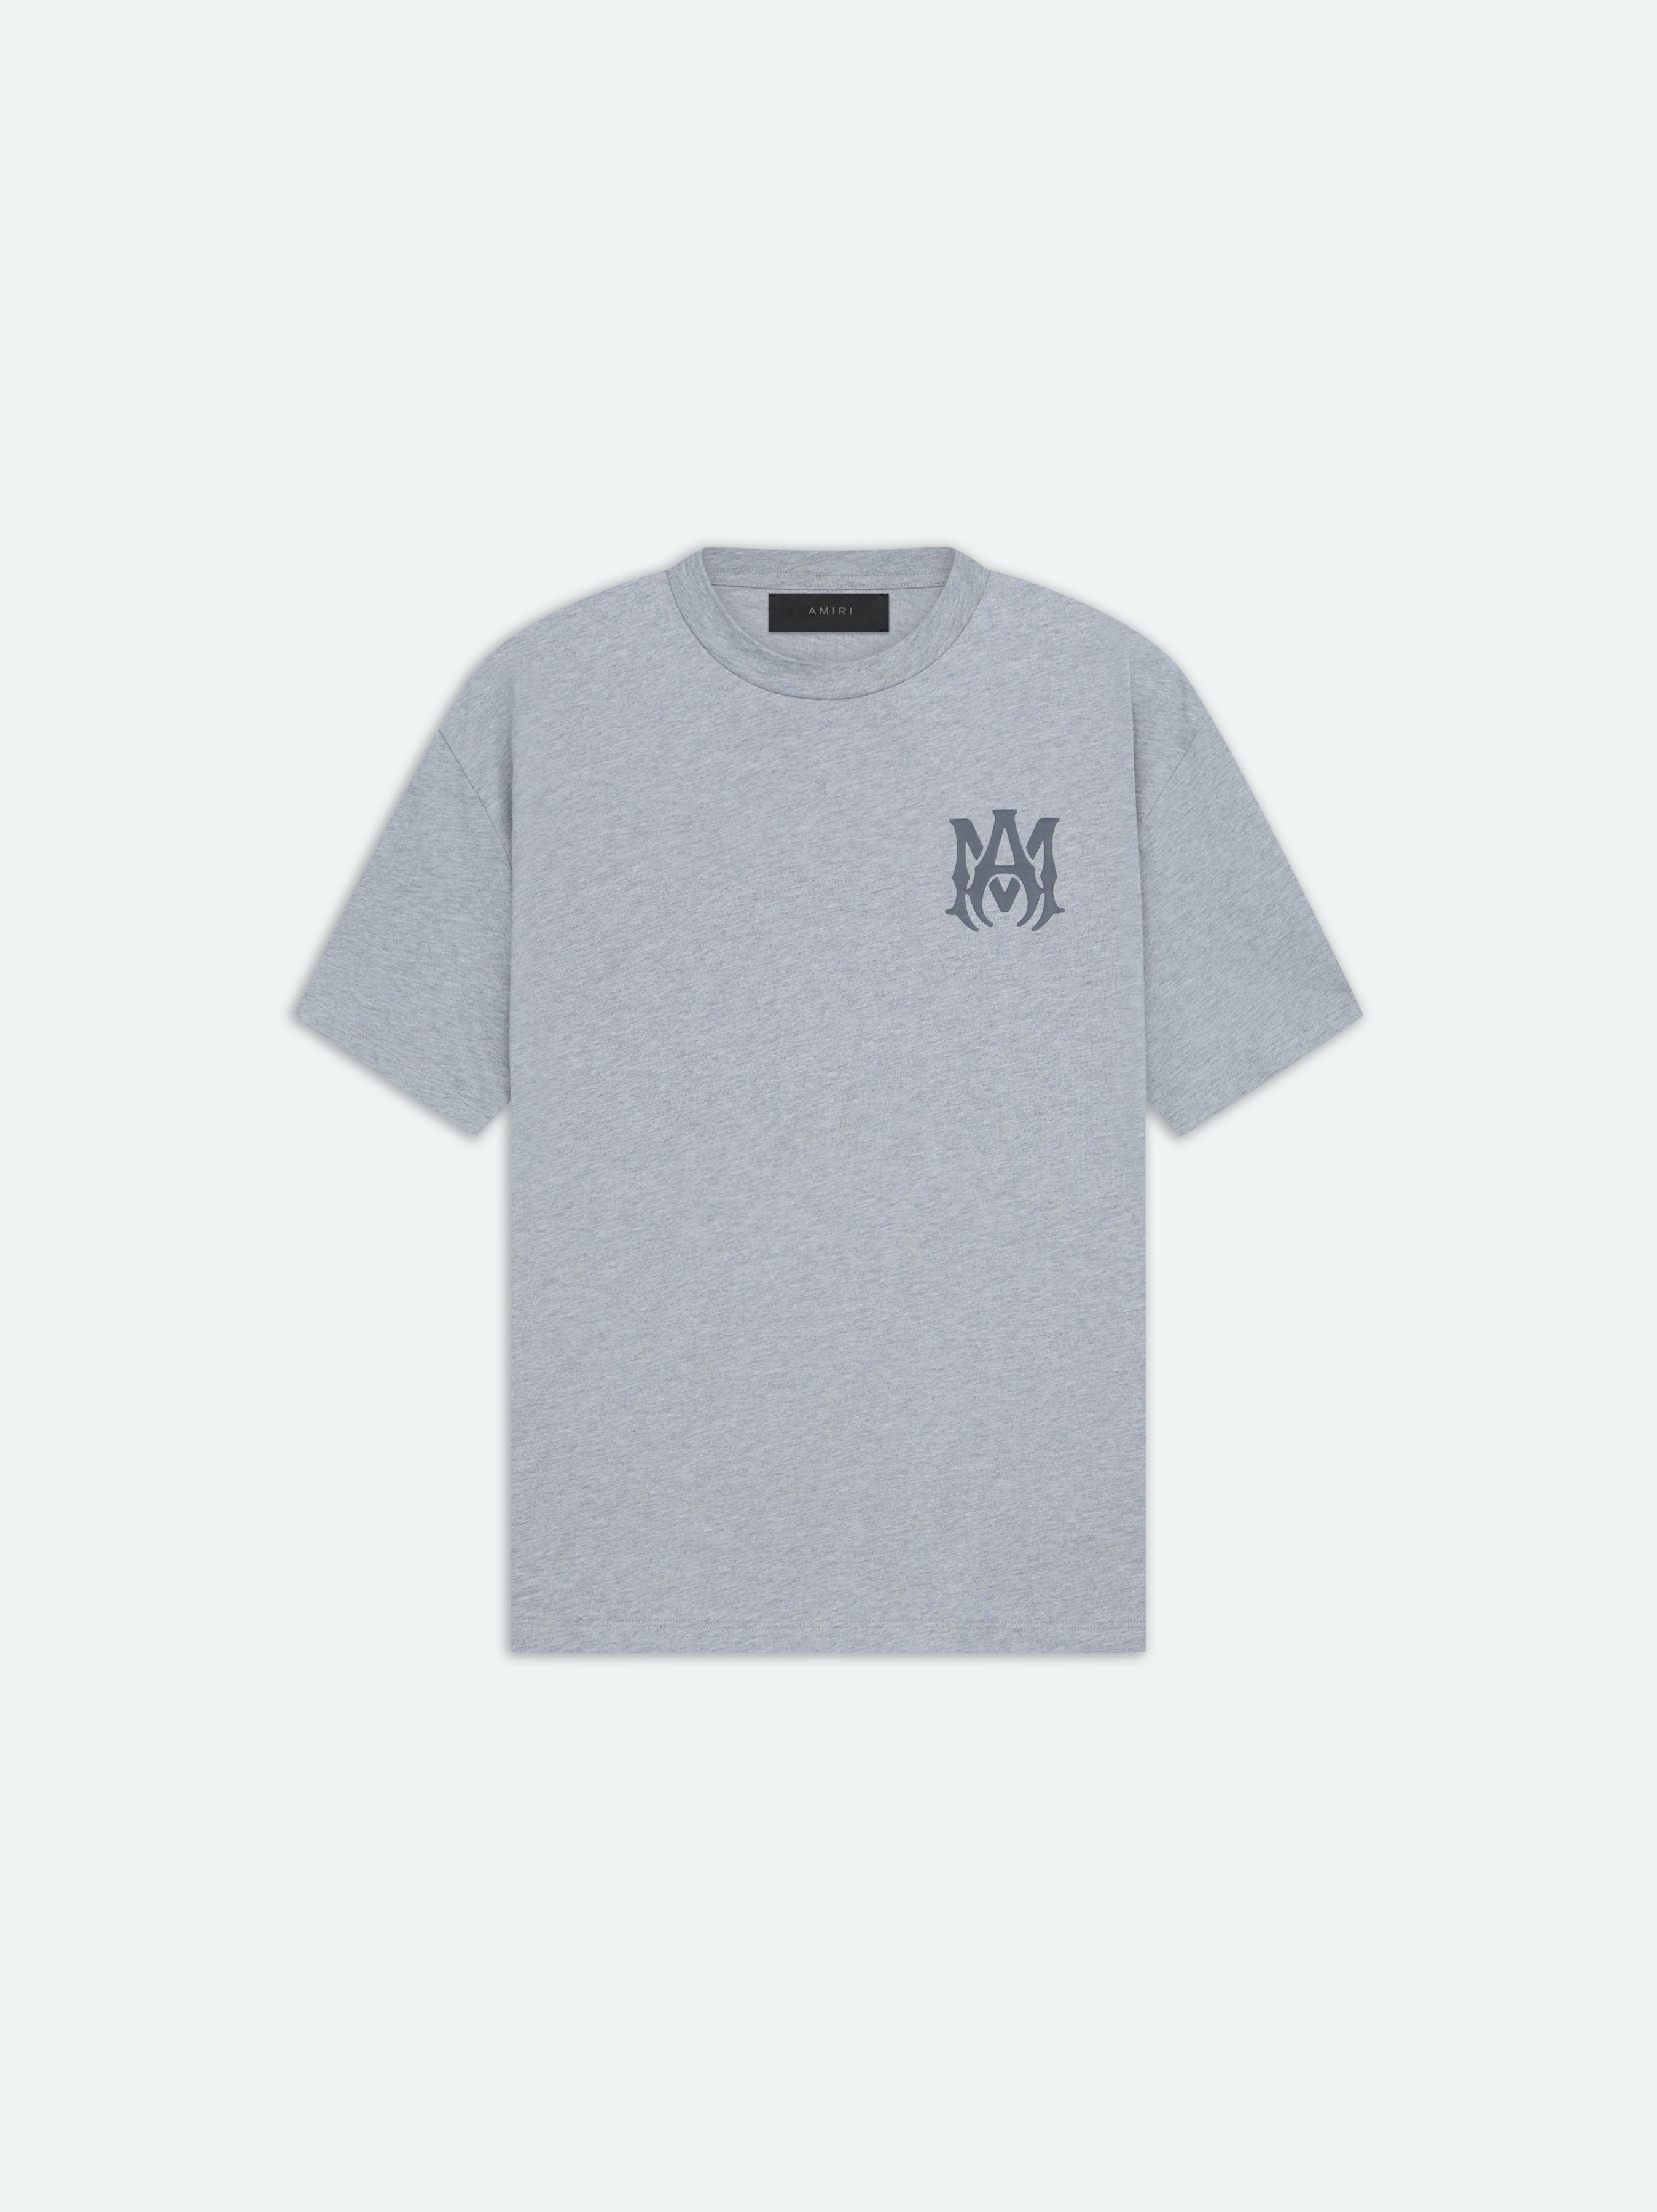 Product MA LOGO TEE - Heather Grey featured image